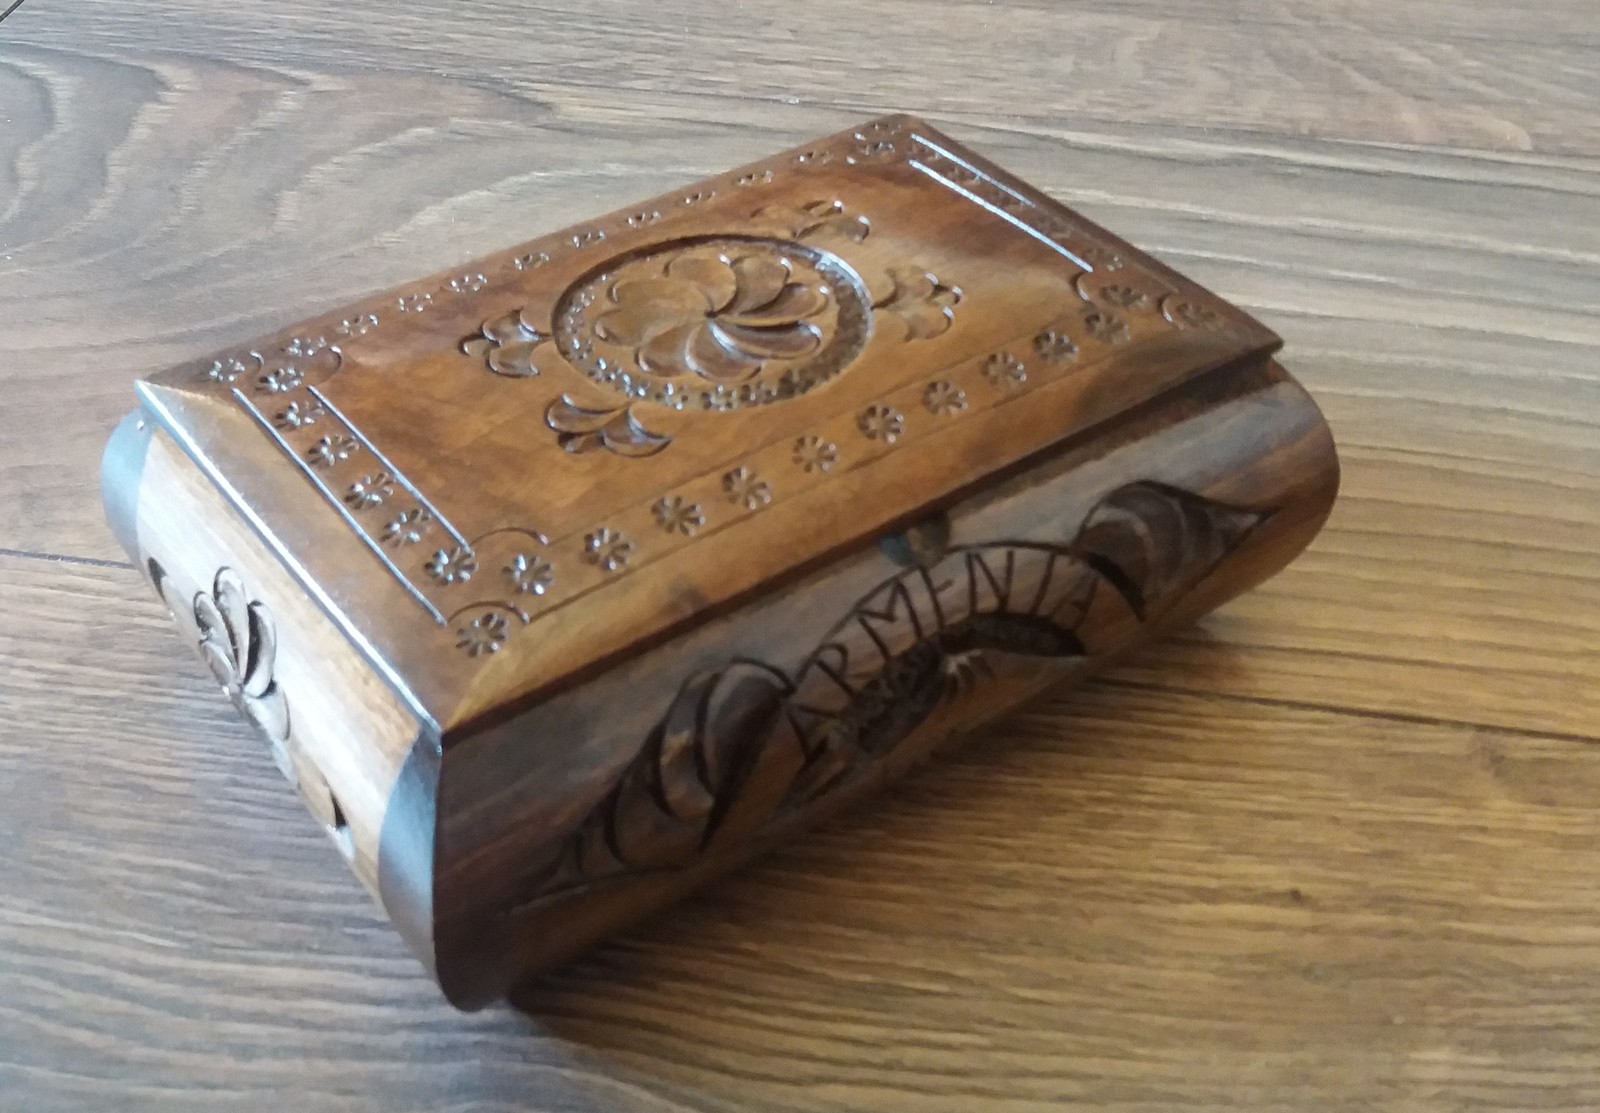 Primary image for Handcrafted Armenian Wooden Box with Eternity Sign and Mount Ararat, Home Décor